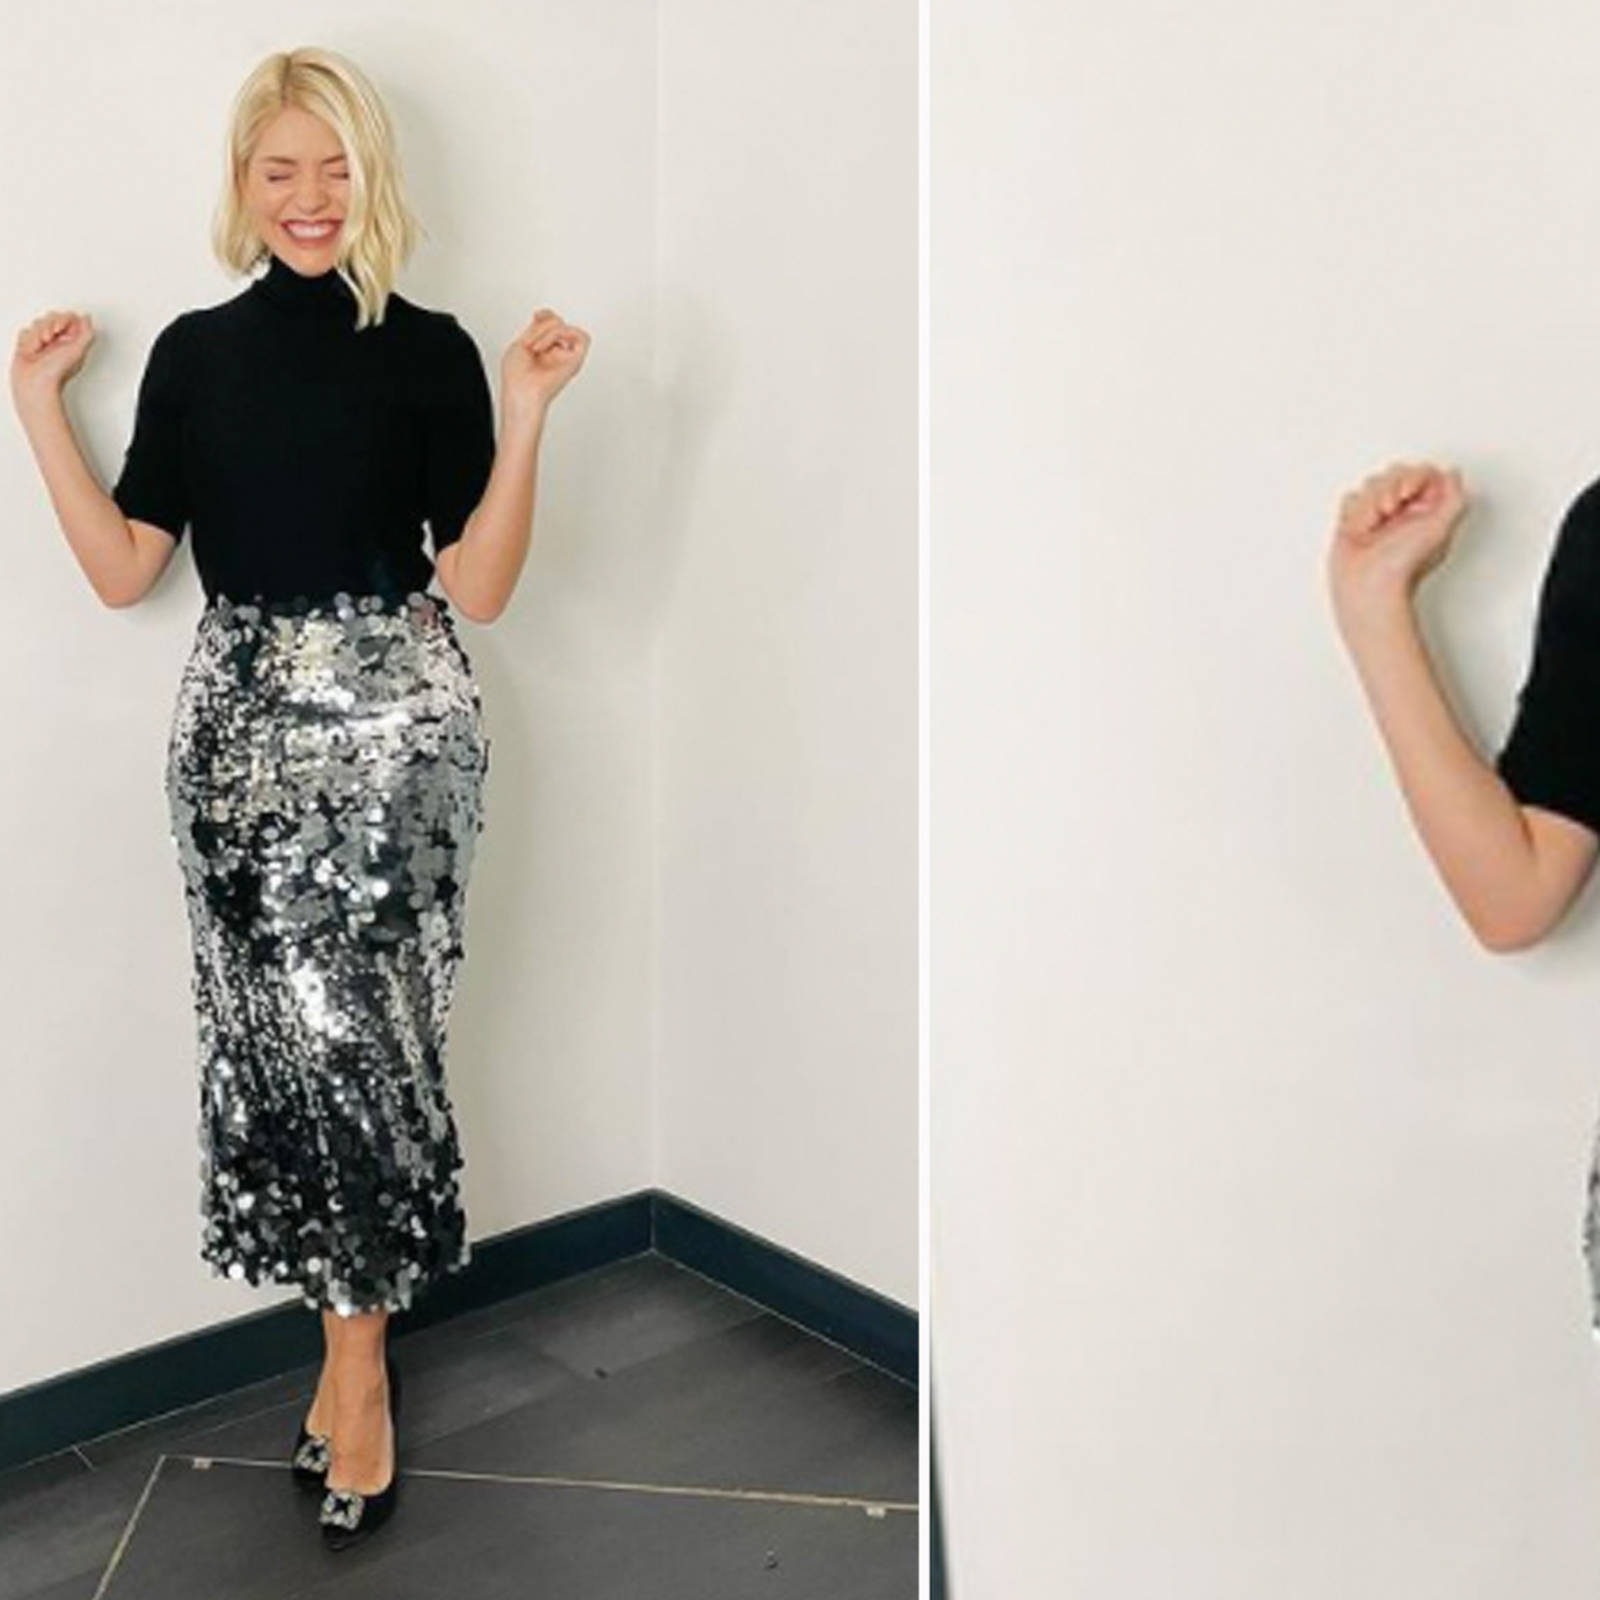 Holly Willoughby news: This Morning presenter looks chic in £39.99 red Zara  trousers